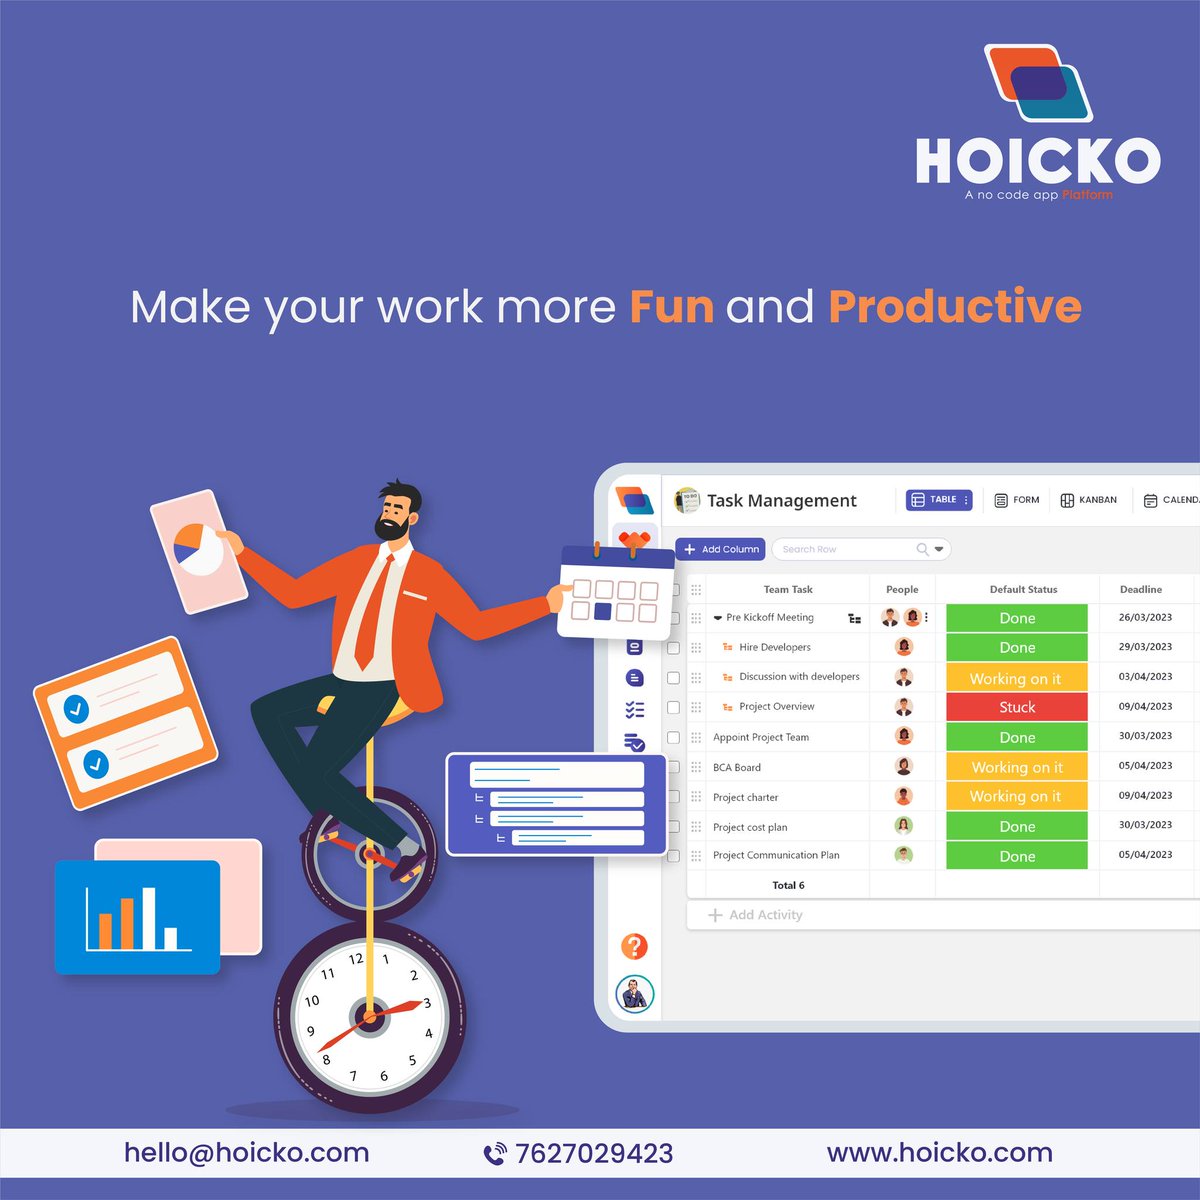 #Hoicko is the ultimate tool to elevate your work experience. Bid farewell to dull routines and embrace a whole new way of working.#oneappforall #nocodeapp #freenocodeapp #projectmanagementsoftware #workflow #workflowmanagementsoftware  #managementsoftware #teammanagementtool